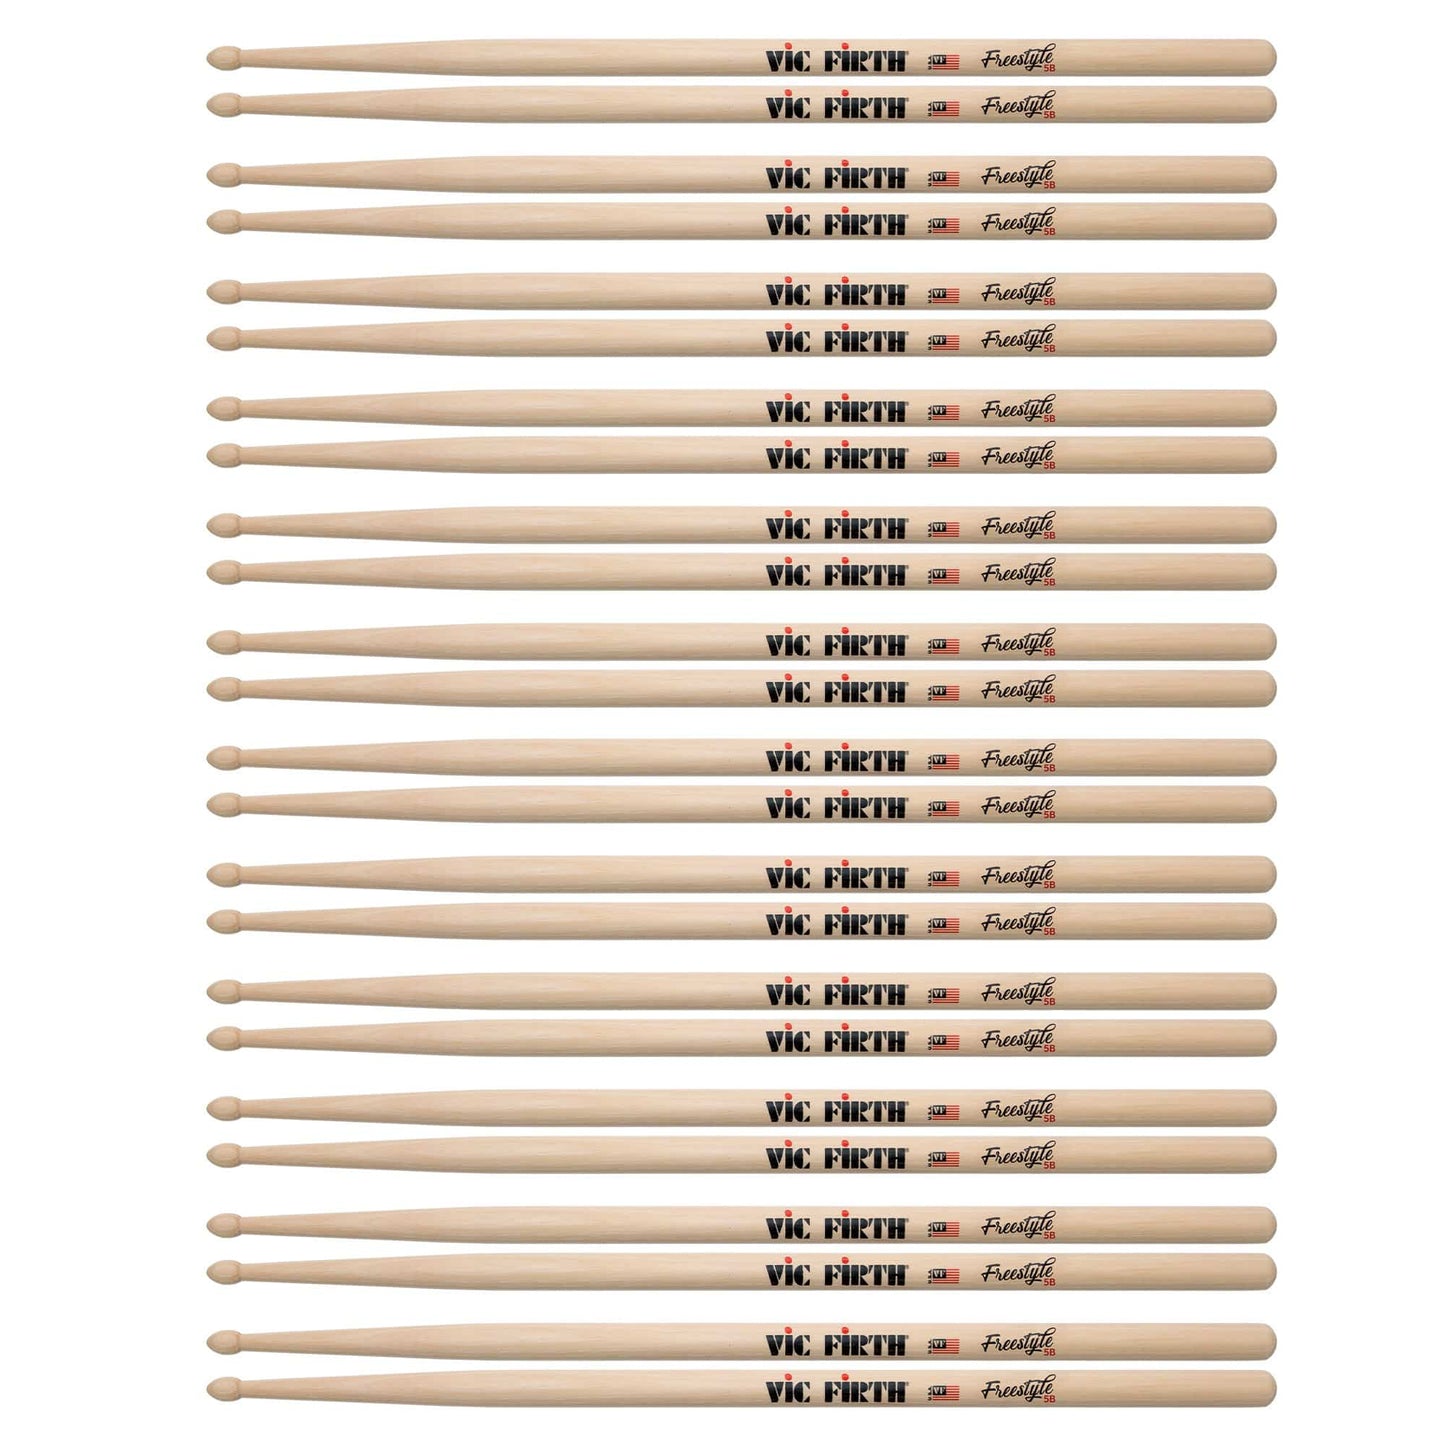 Vic Firth American Concept Freestyle 5B Wood Tip Drum Sticks (12 Pair Bundle) Drums and Percussion / Parts and Accessories / Drum Sticks and Mallets